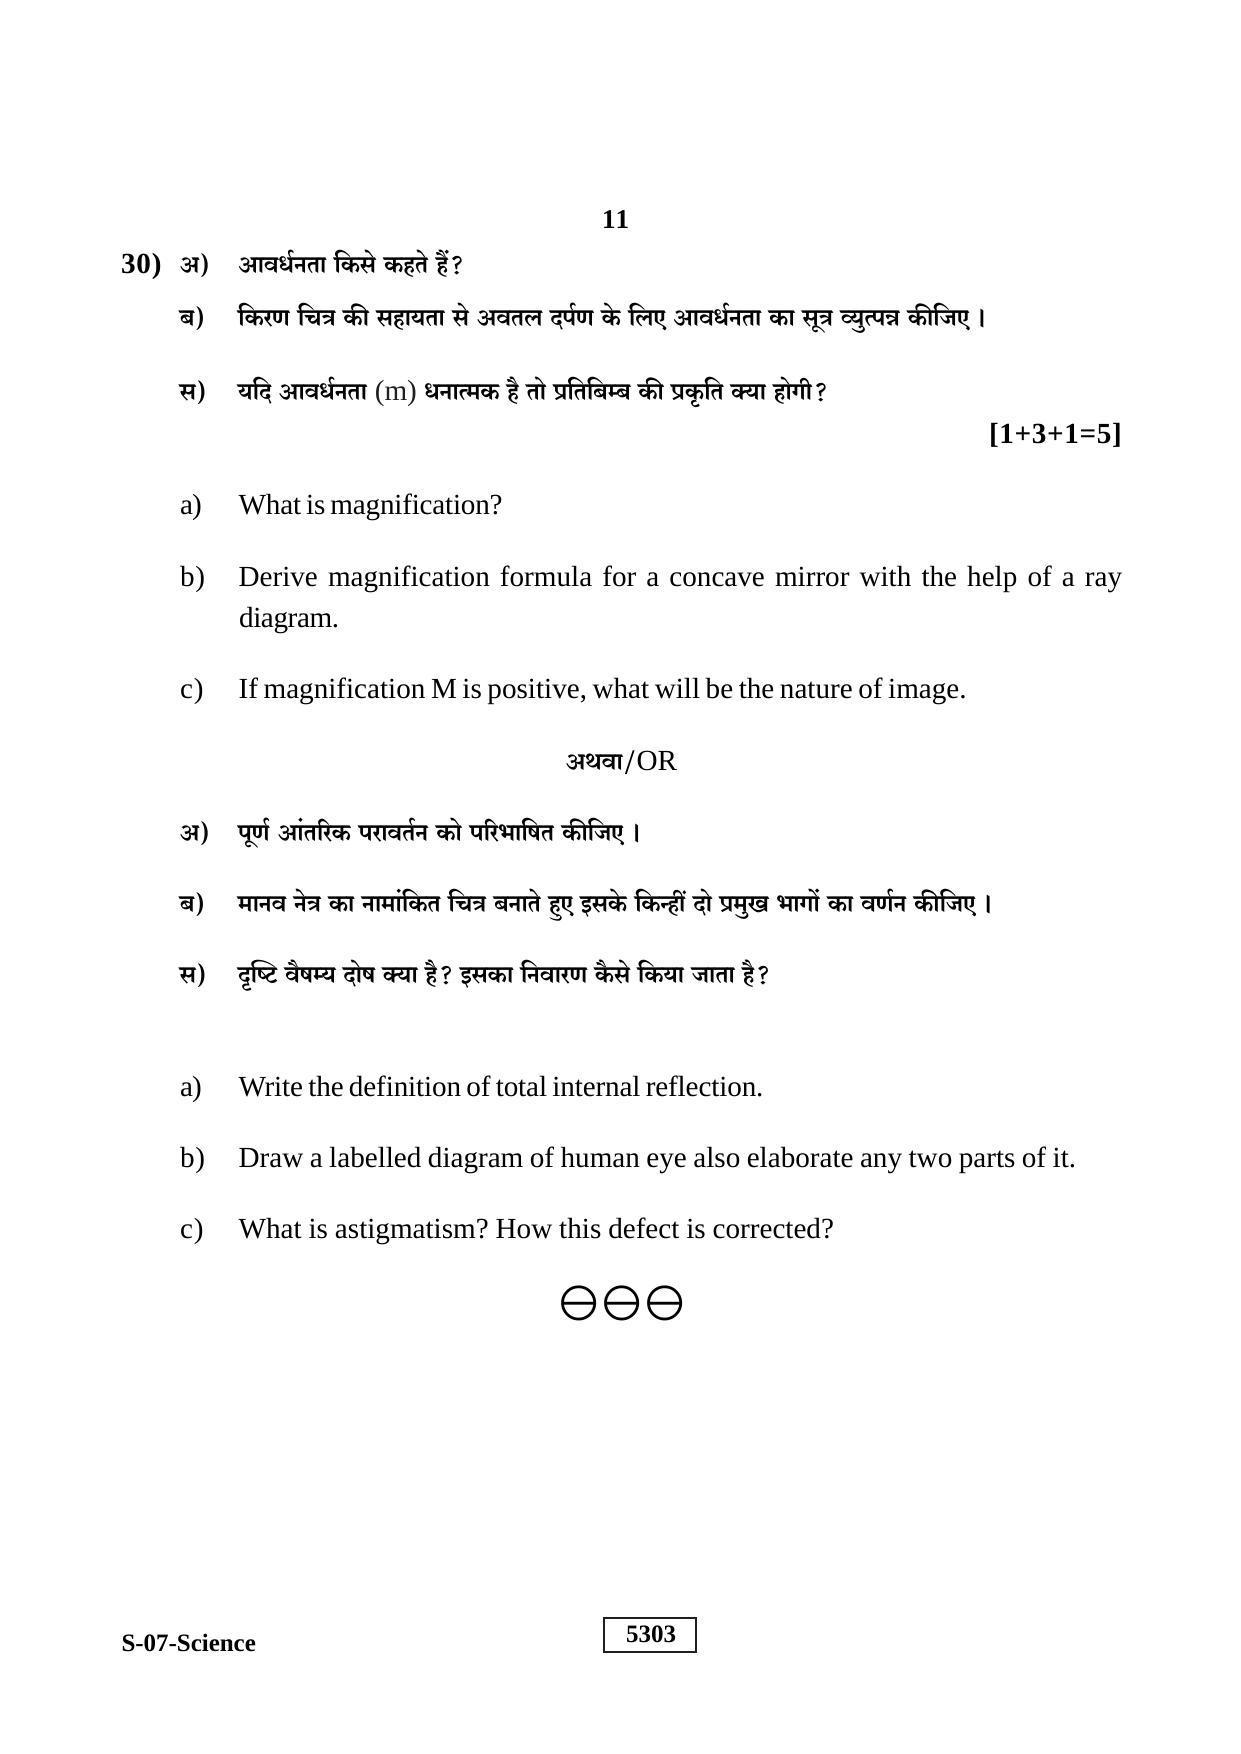 RBSE Class 10 Science 2020 Question Paper - Page 11